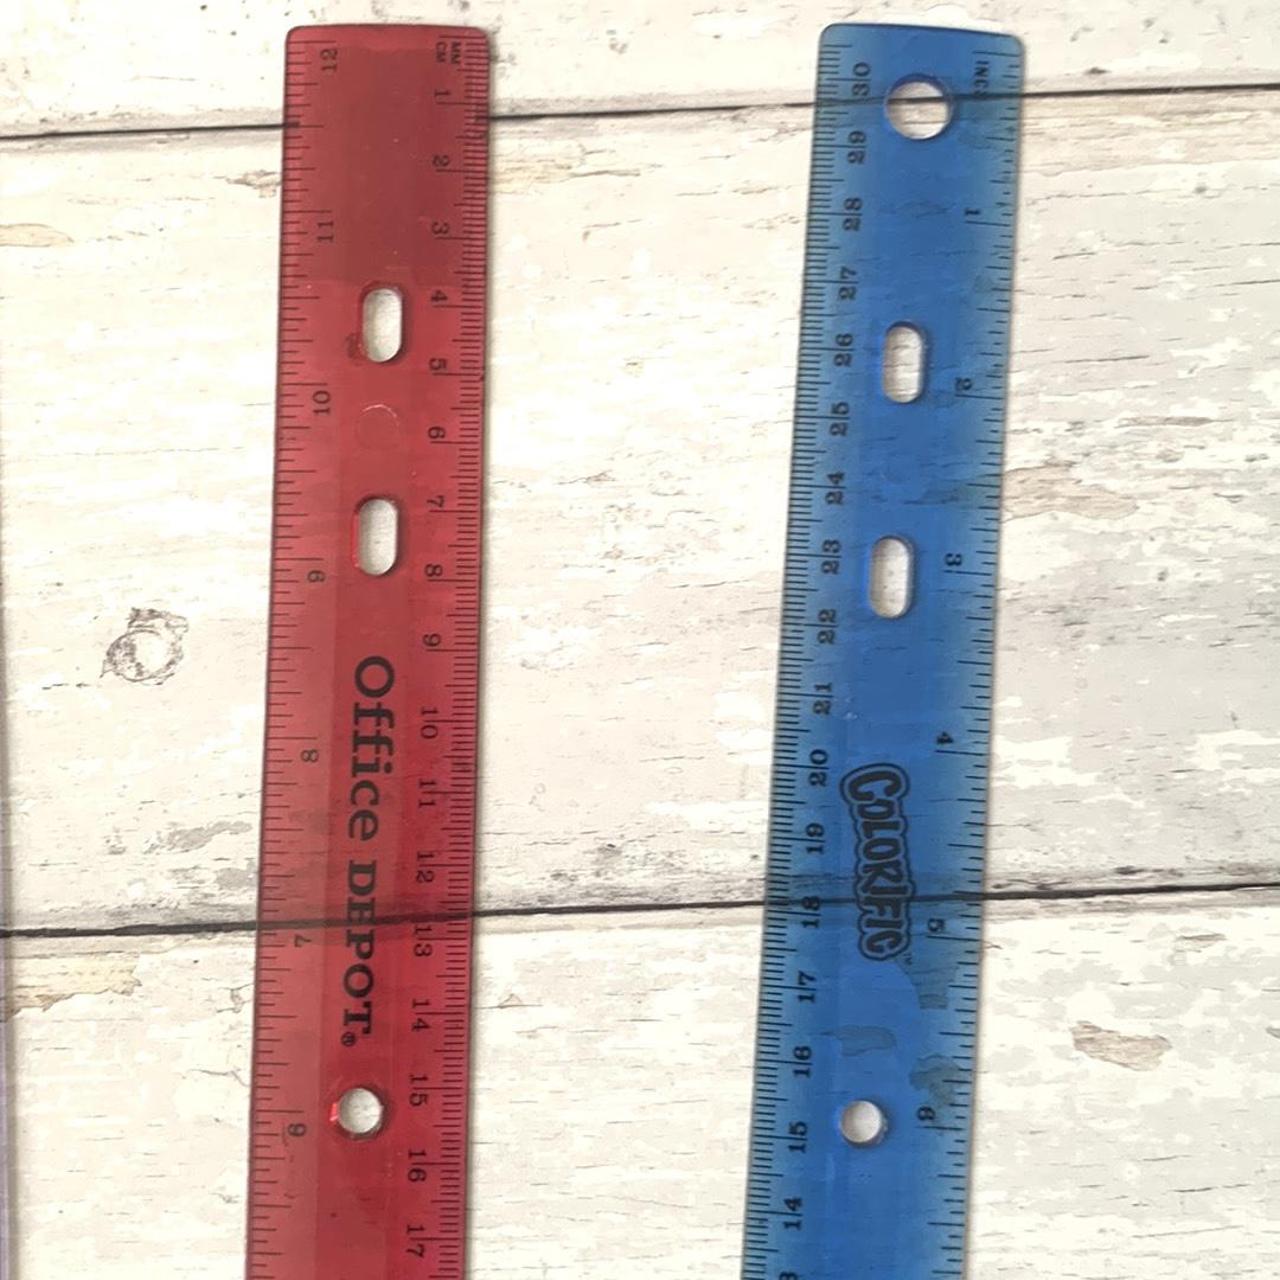 Product Image 2 - #Acrylic #12in #Ruler 4 Pack